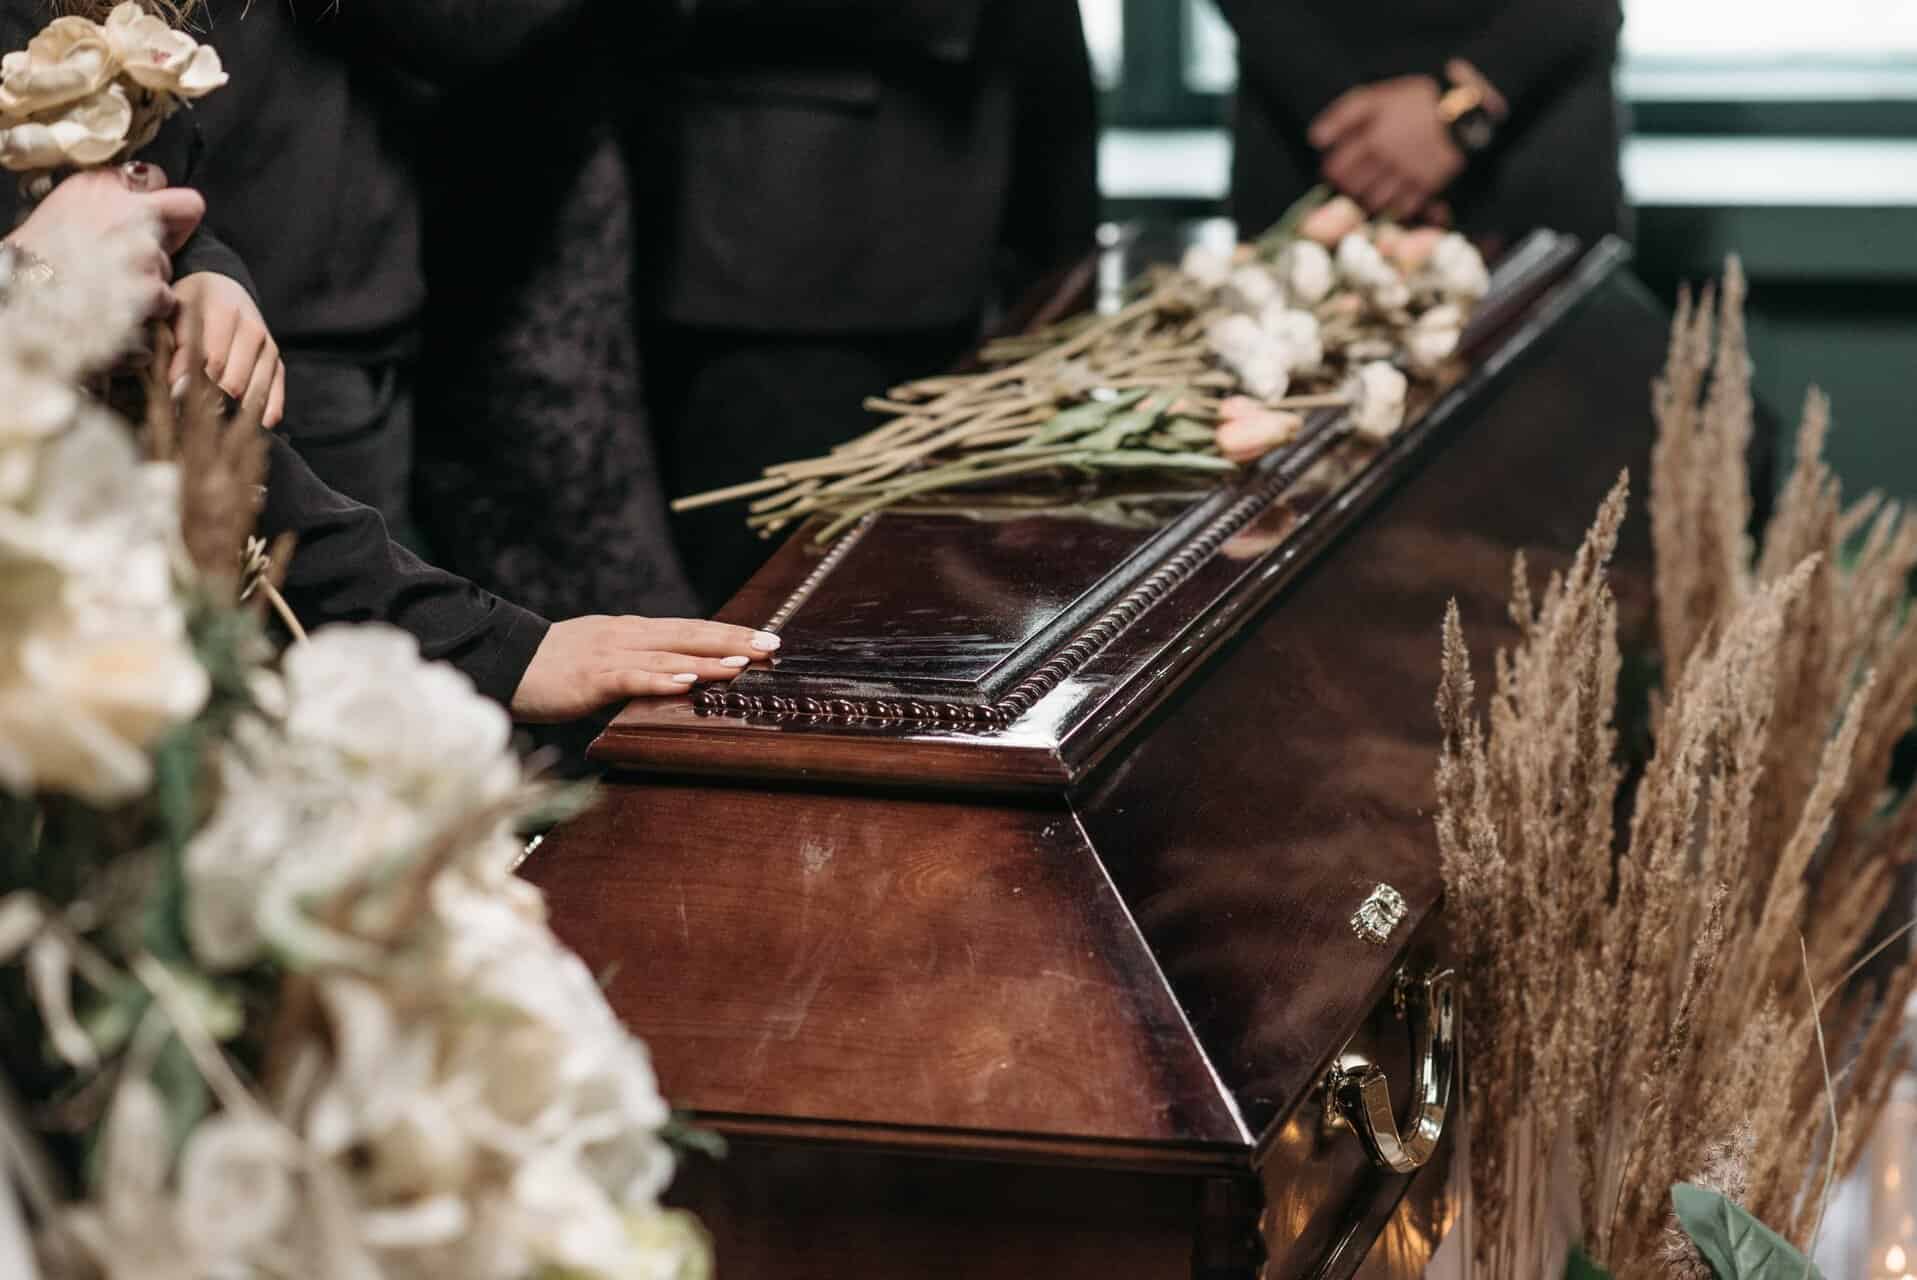 Less is More: How to Plan a Simple Funeral that Honours Your Loved One